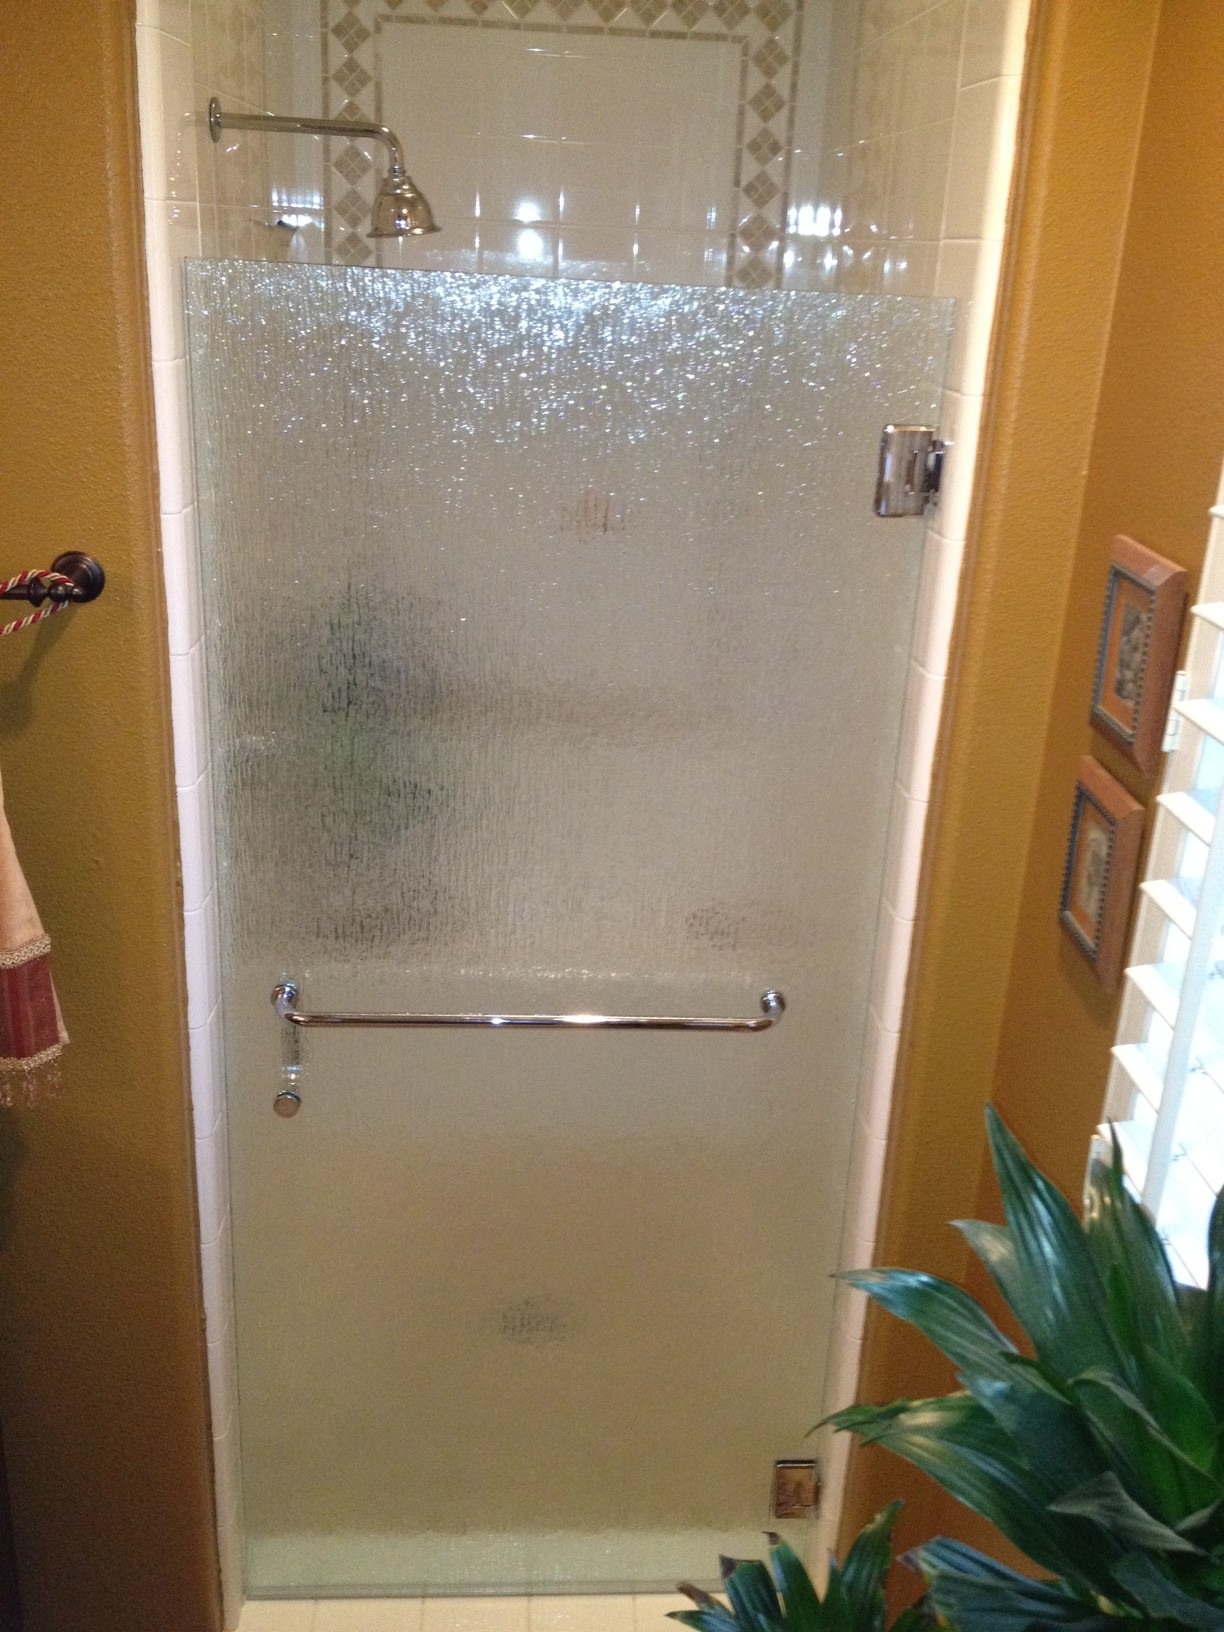 OnTrack installs and replaces shower doors